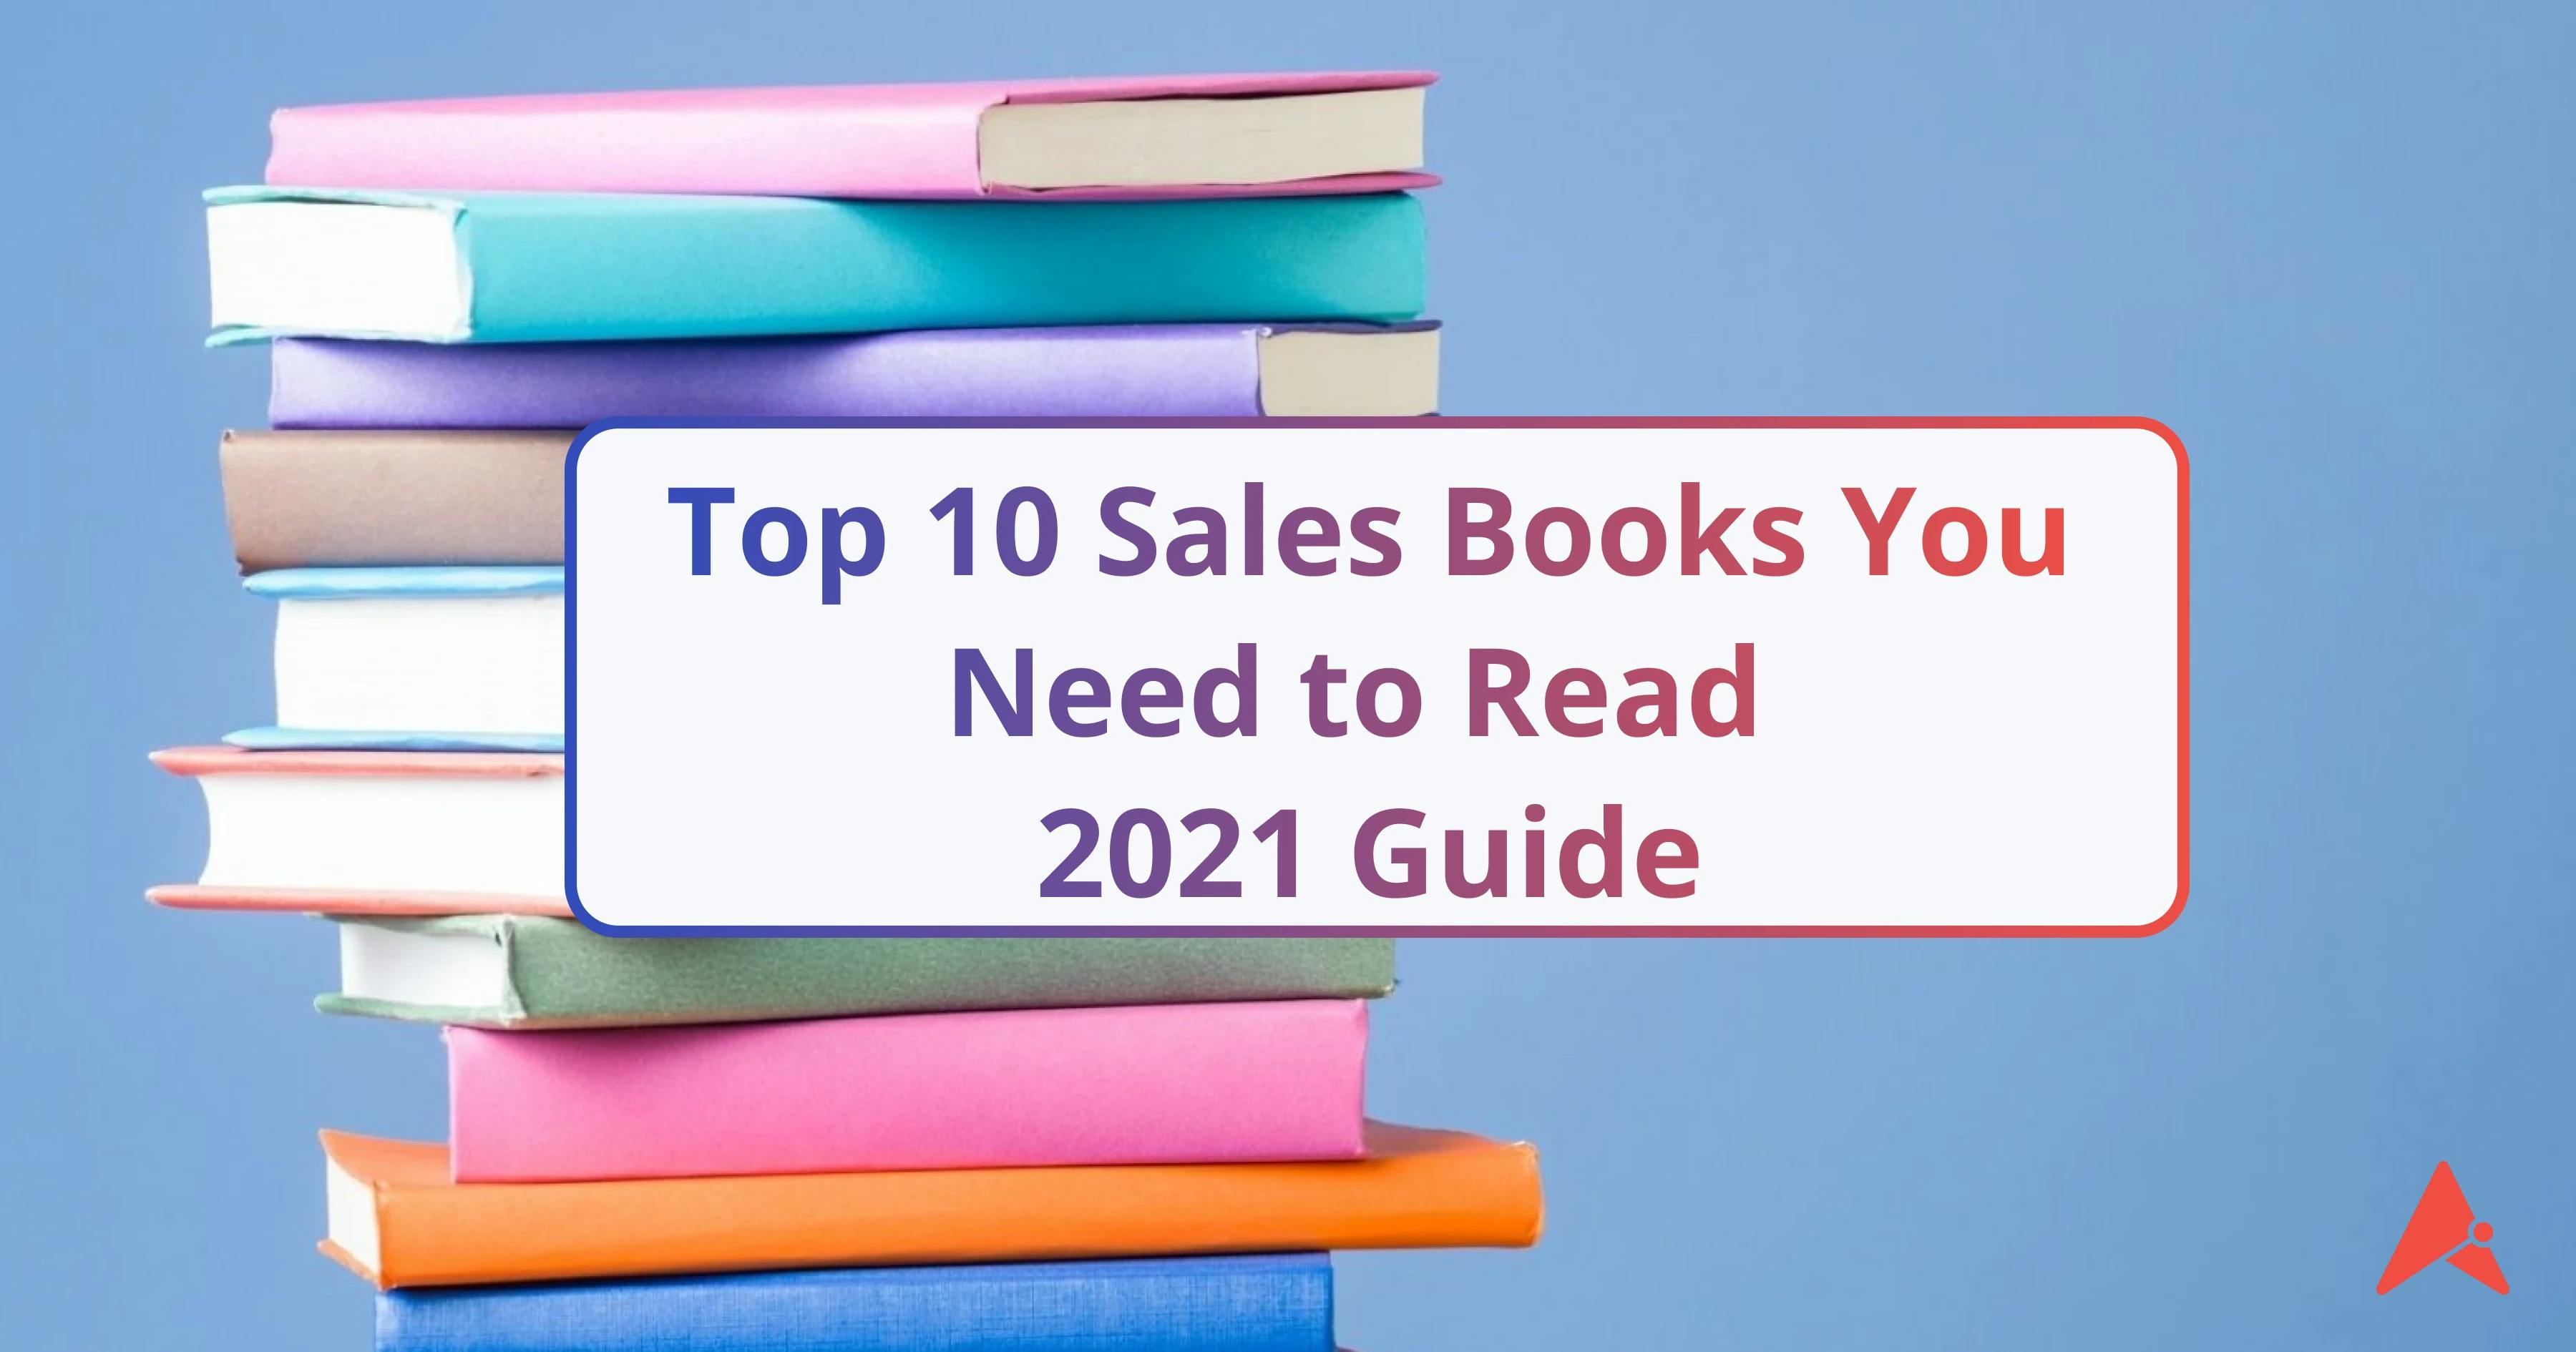 Top 10 Sales Books You Need to Read | 2021 Guide